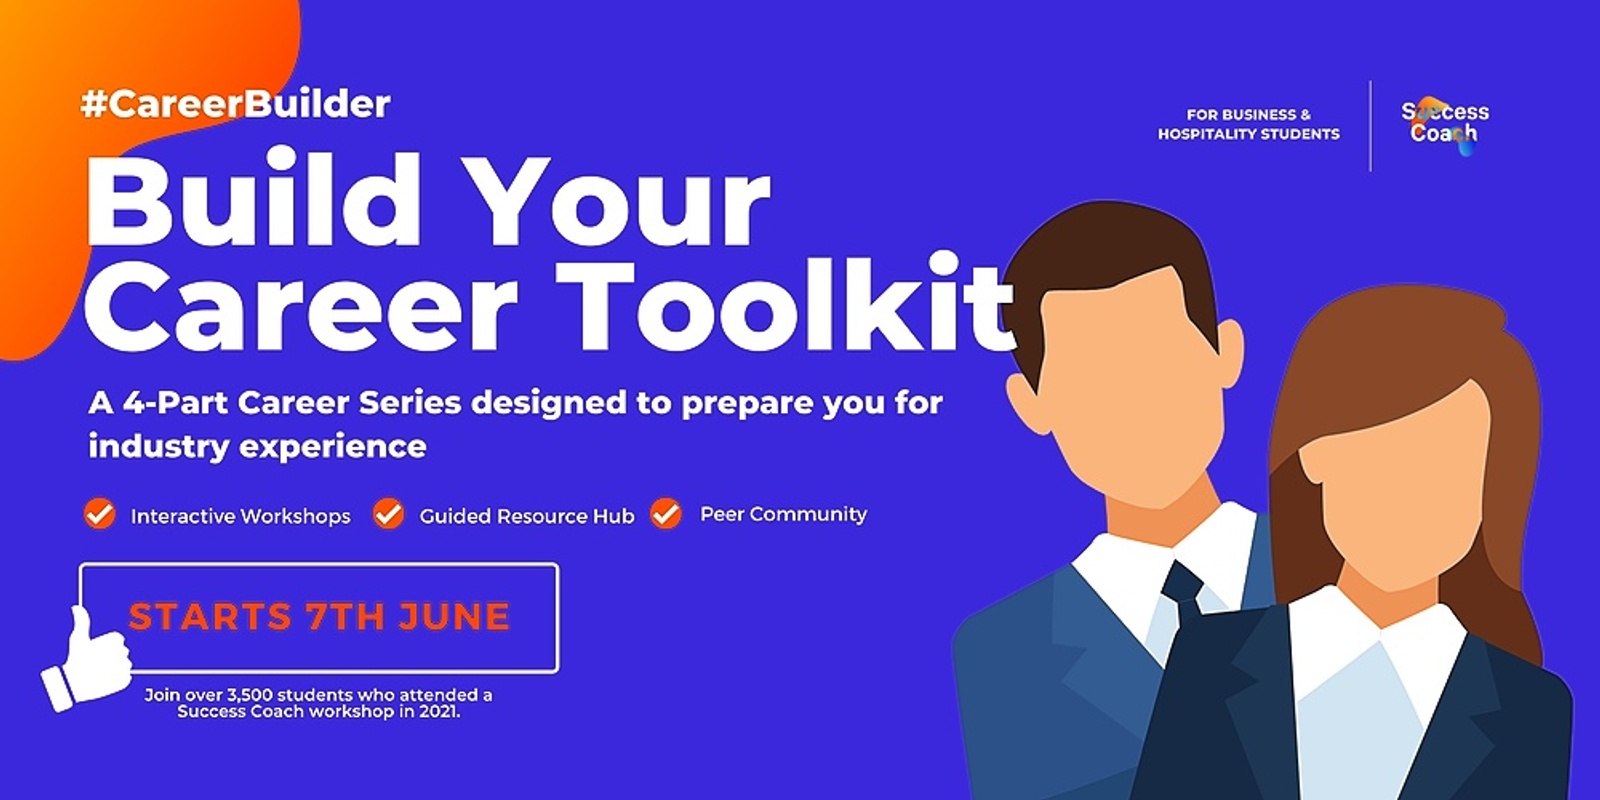 Banner image for #CareerBuilder | Build your Career Toolkit | Starting 7th June 2022